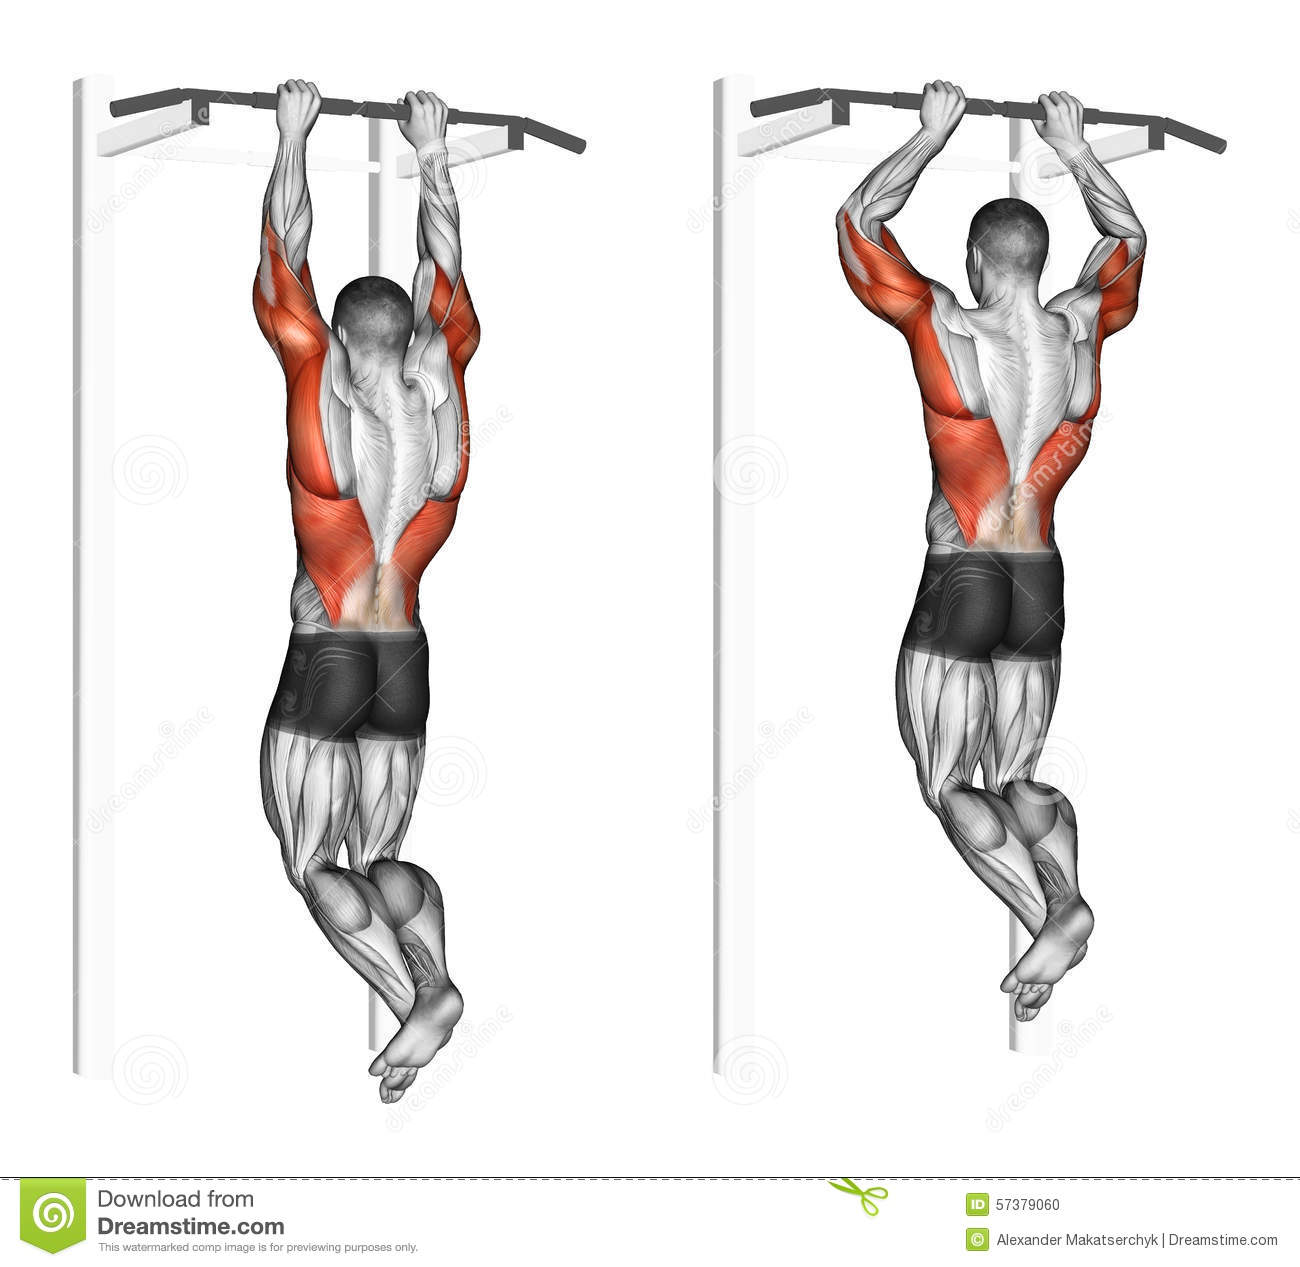 Pull Ups On The Brachialis  Exercising For Bodybuilding Target Muscles